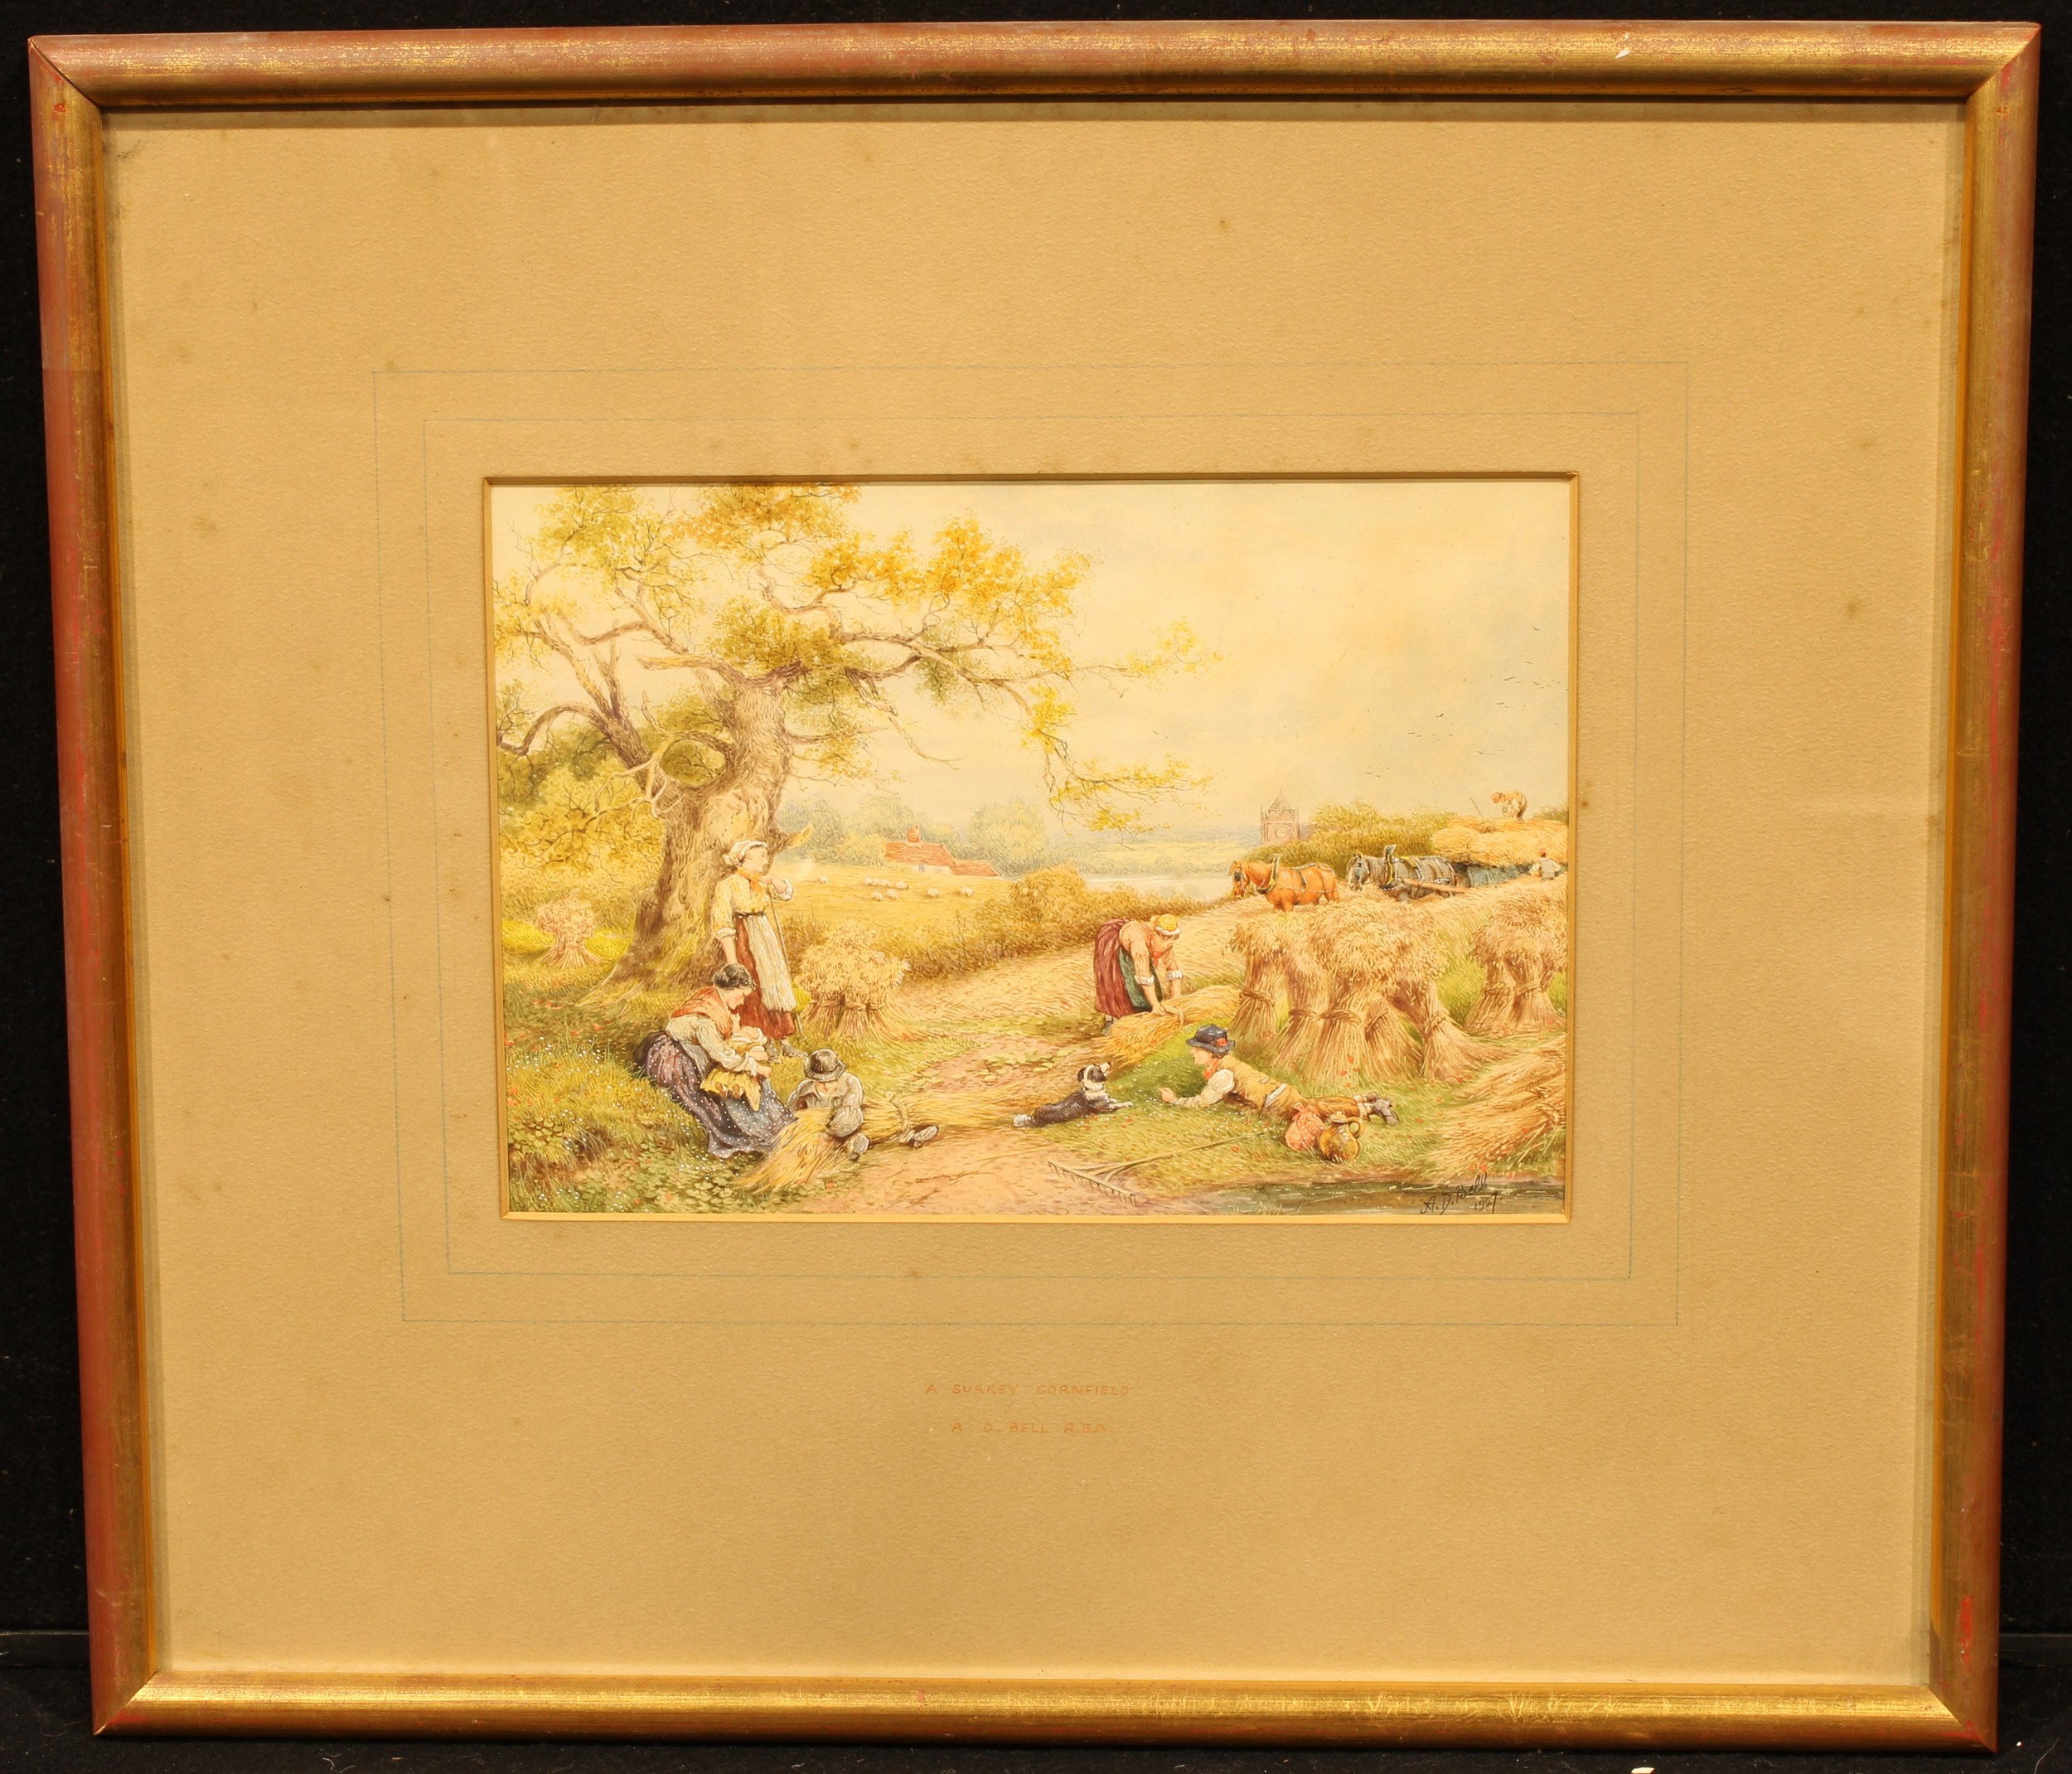 A D Bell (1884 - 1966) A Surrey Cornfield signed, dated 1927, watercolour, 17.5cm x 25cm - Image 2 of 4